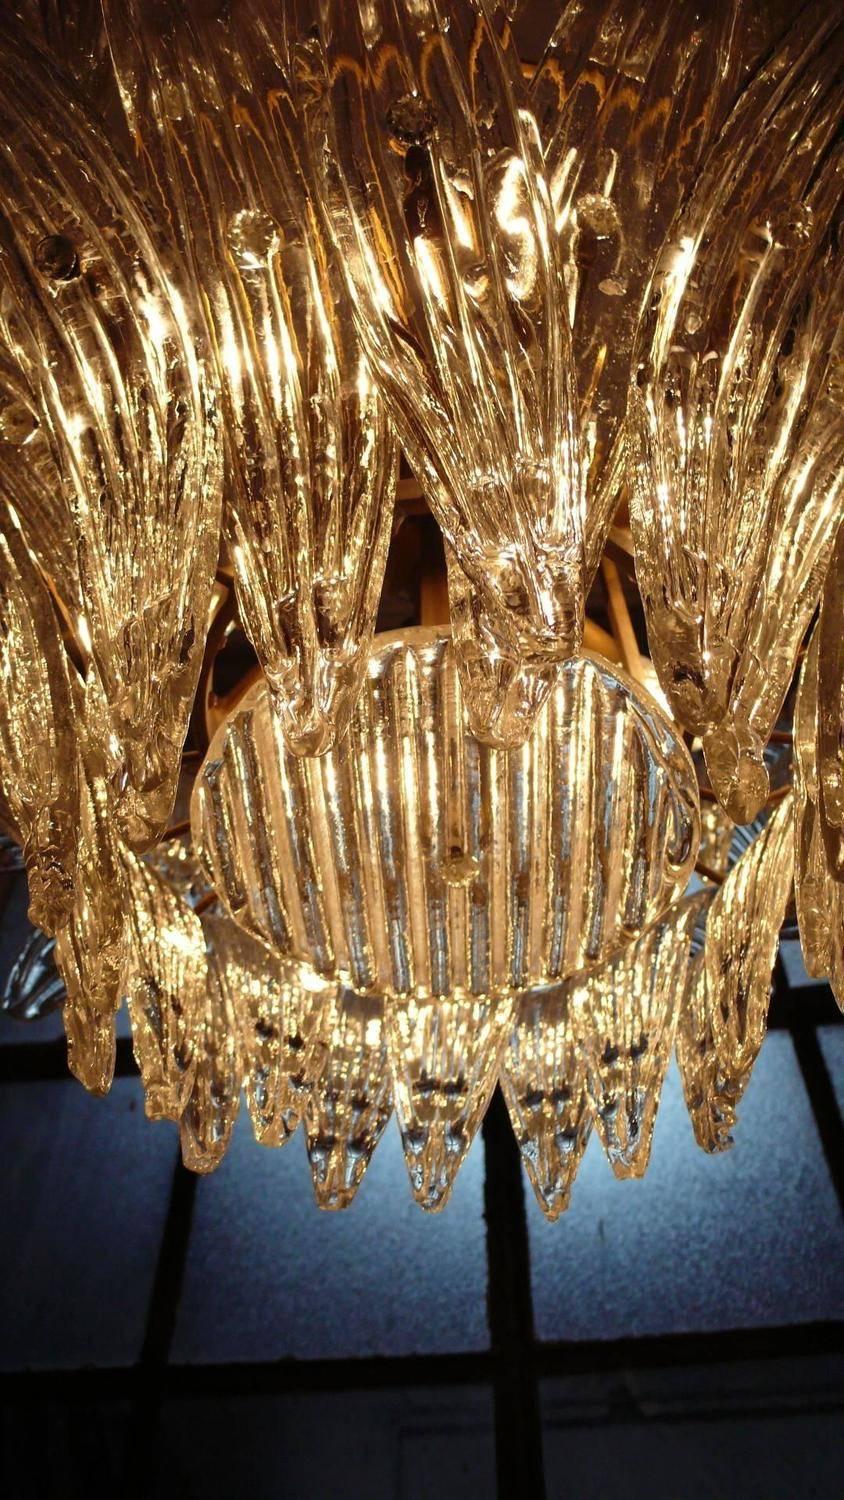 The chandelier were located in the hall of a big hotel on the Amalfi Coast. Each individual is composed by 58 large leaves in pure Murano glass. Available four chandeliers and 12 pairs of sconces.